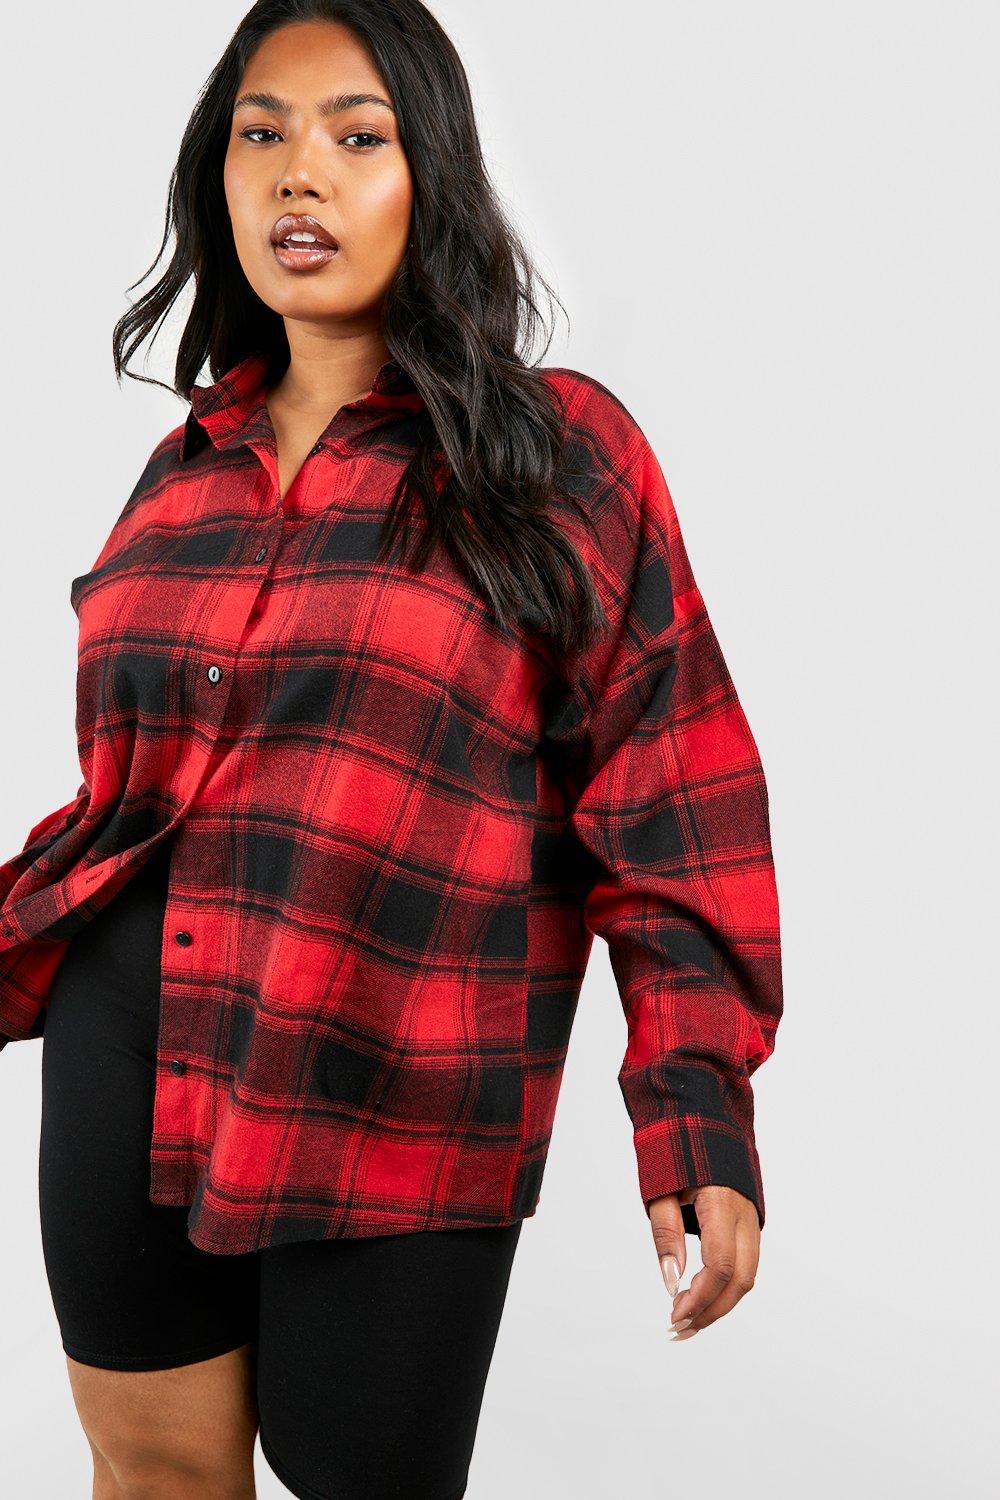 Red and Black Check Shirt Plus Size Clothing from Tempted Ireland